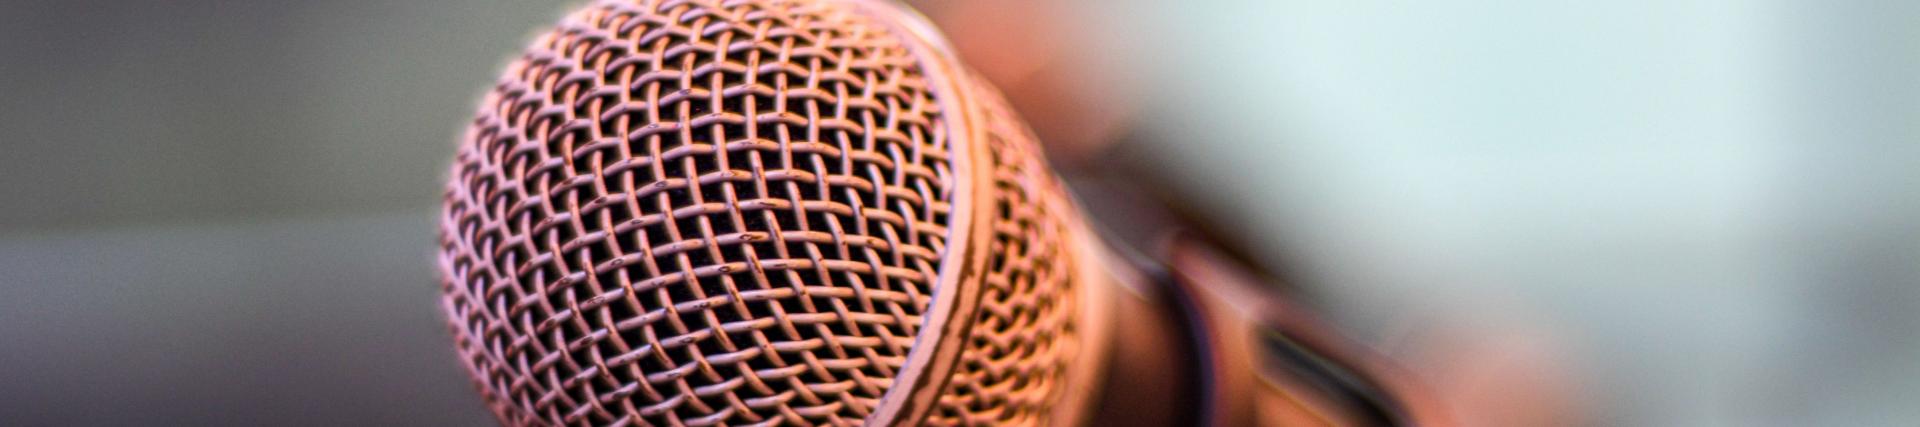 Close up of a microphone in front of a blurred background